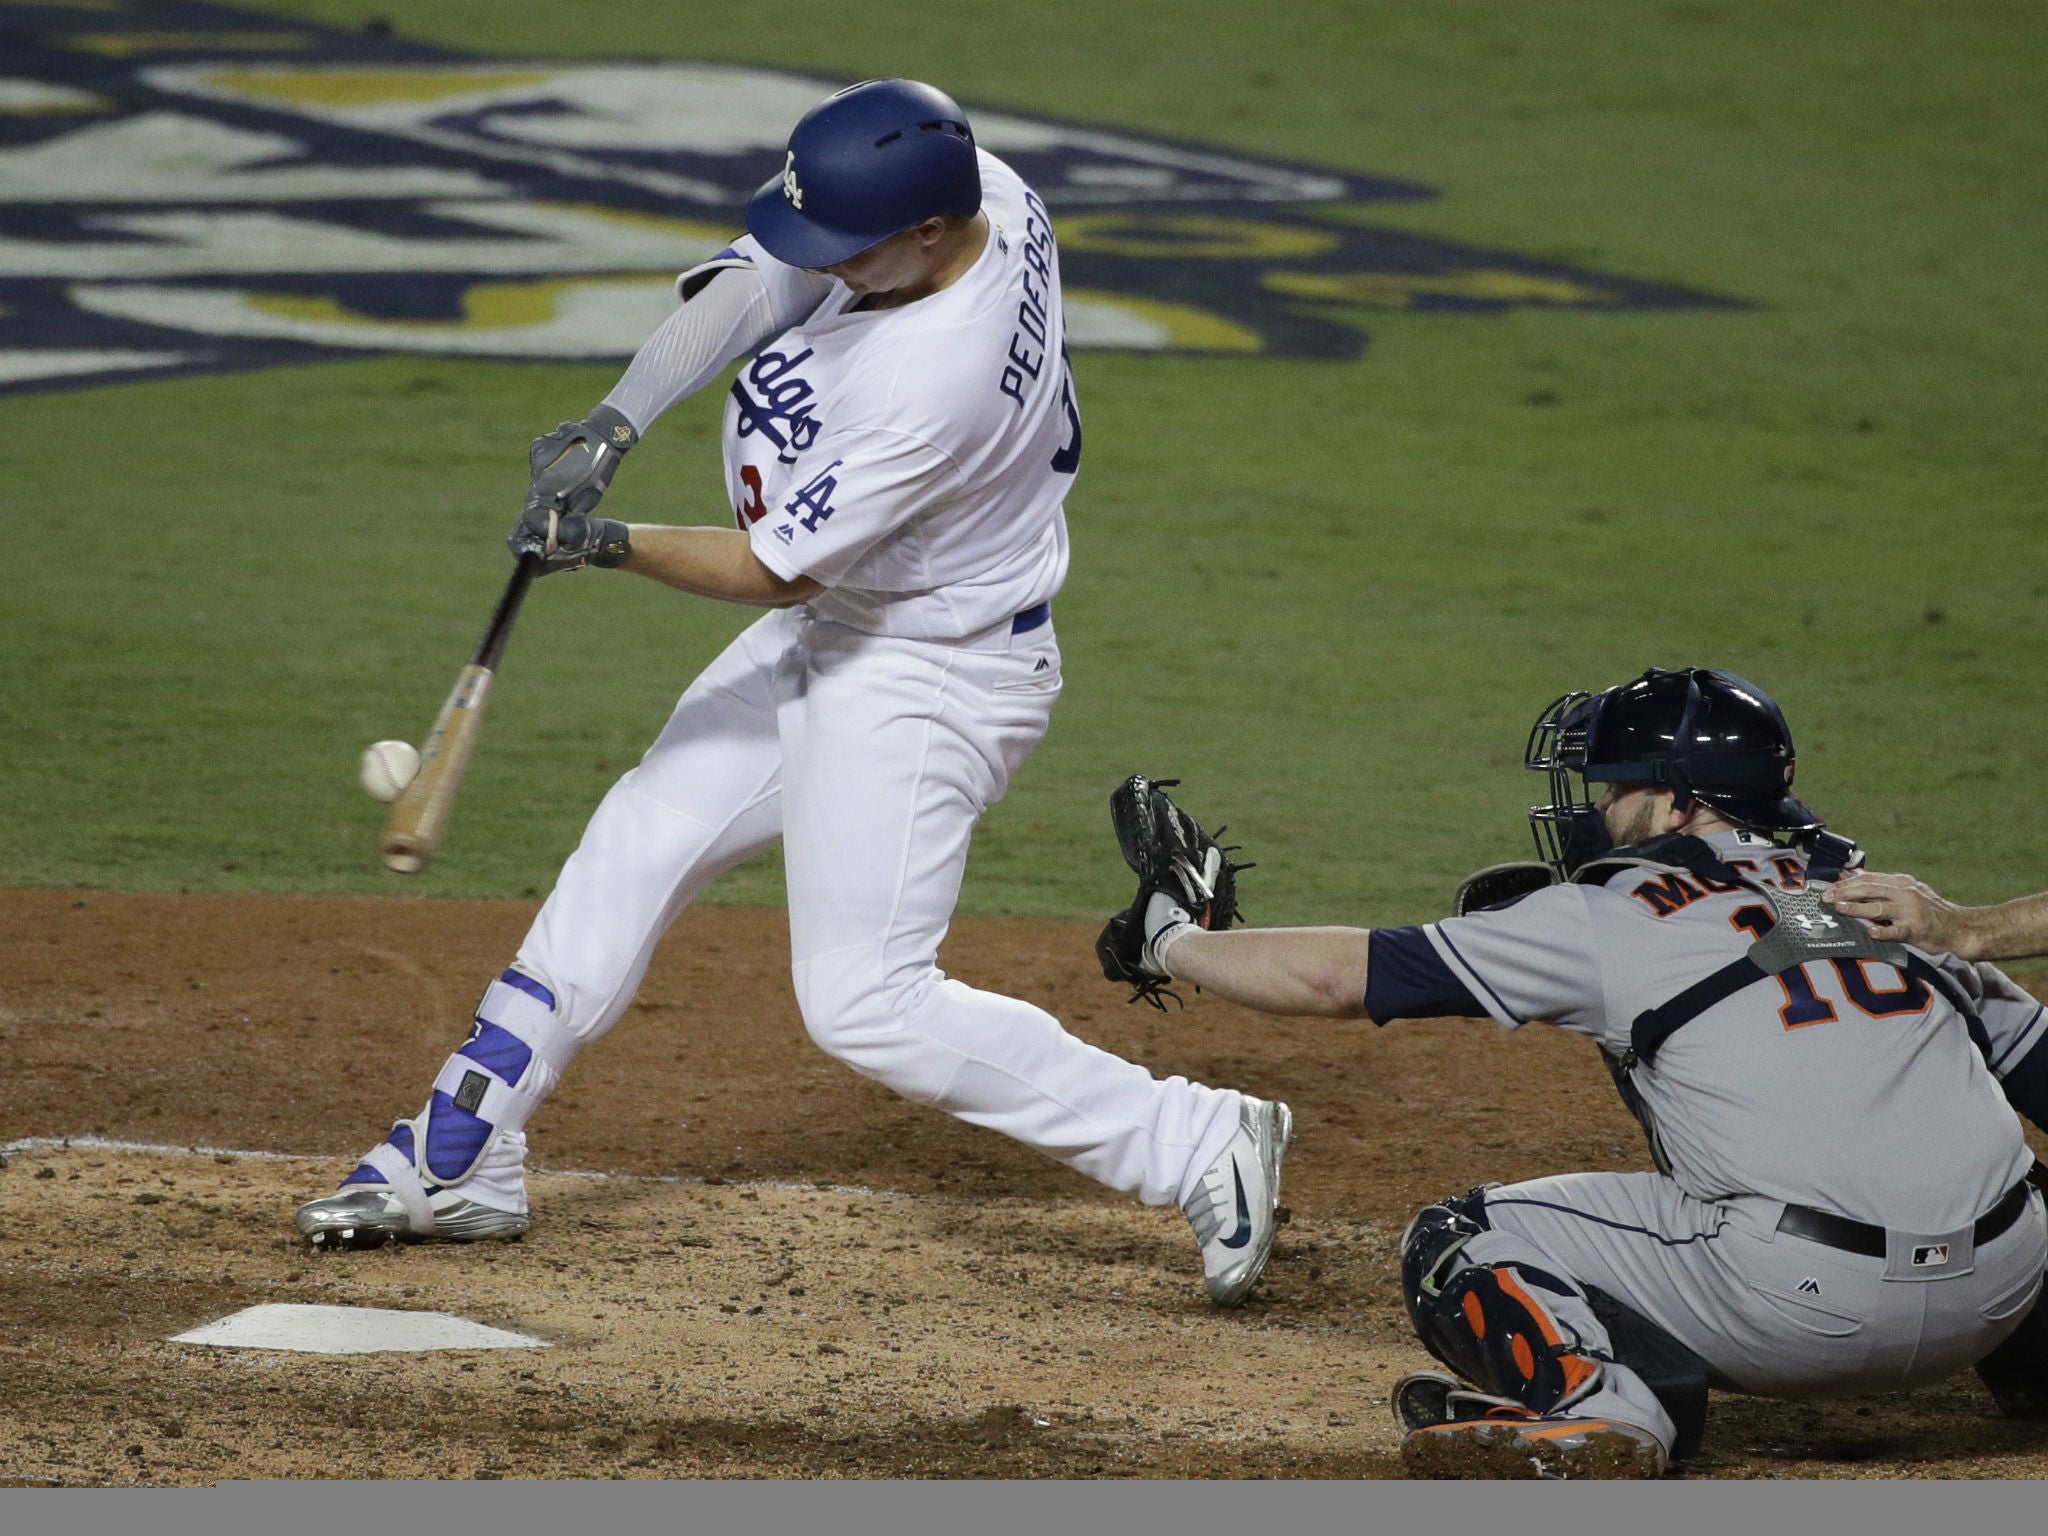 Los Angeles Dodgers' Joc Pederson hits a home run against the Houston Astros during the seventh inning